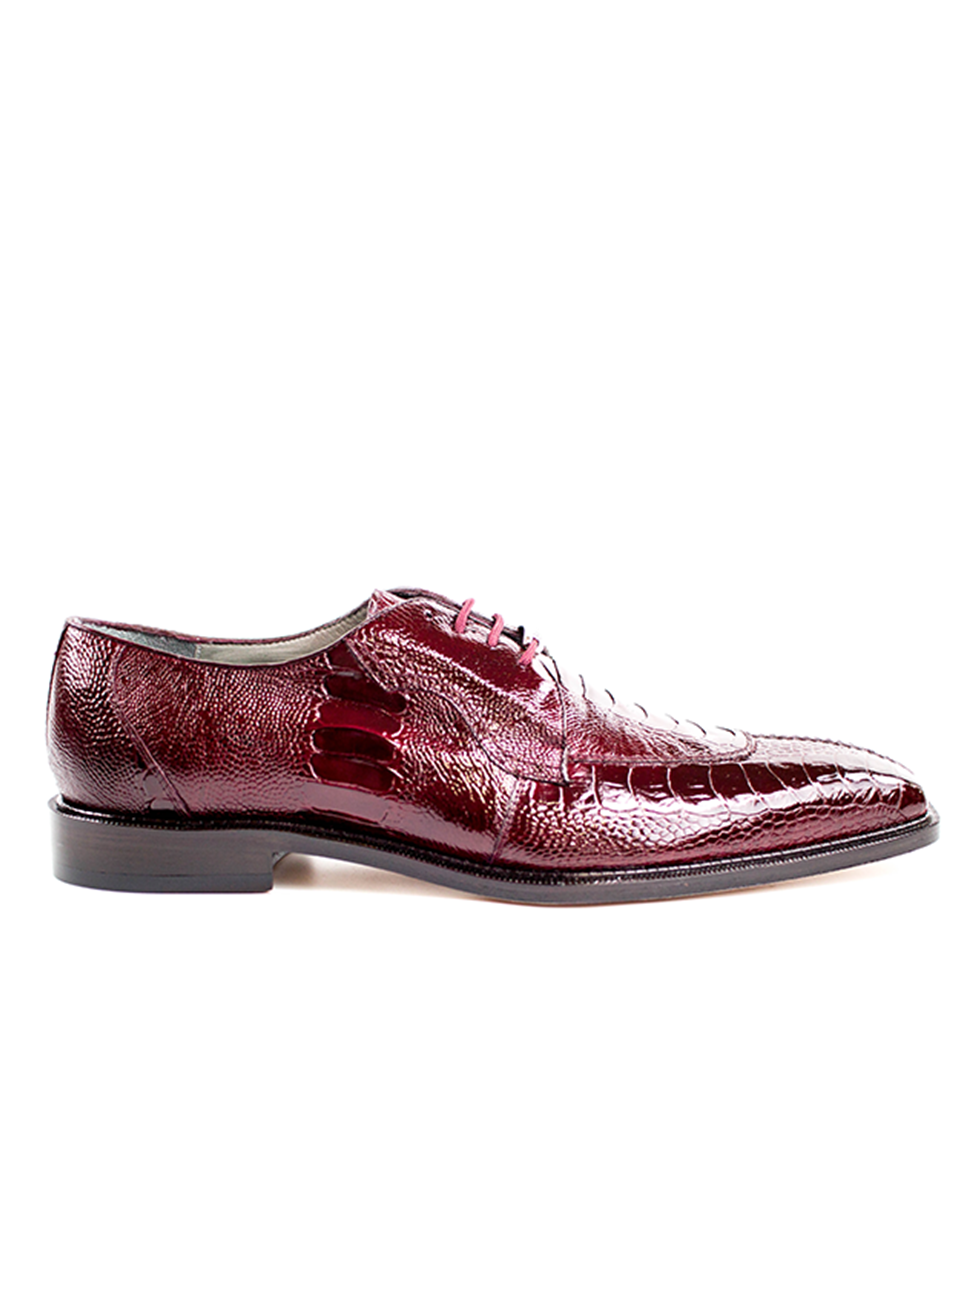 Belvedere Grey Ostrich and crocodile skin Shoes for Men